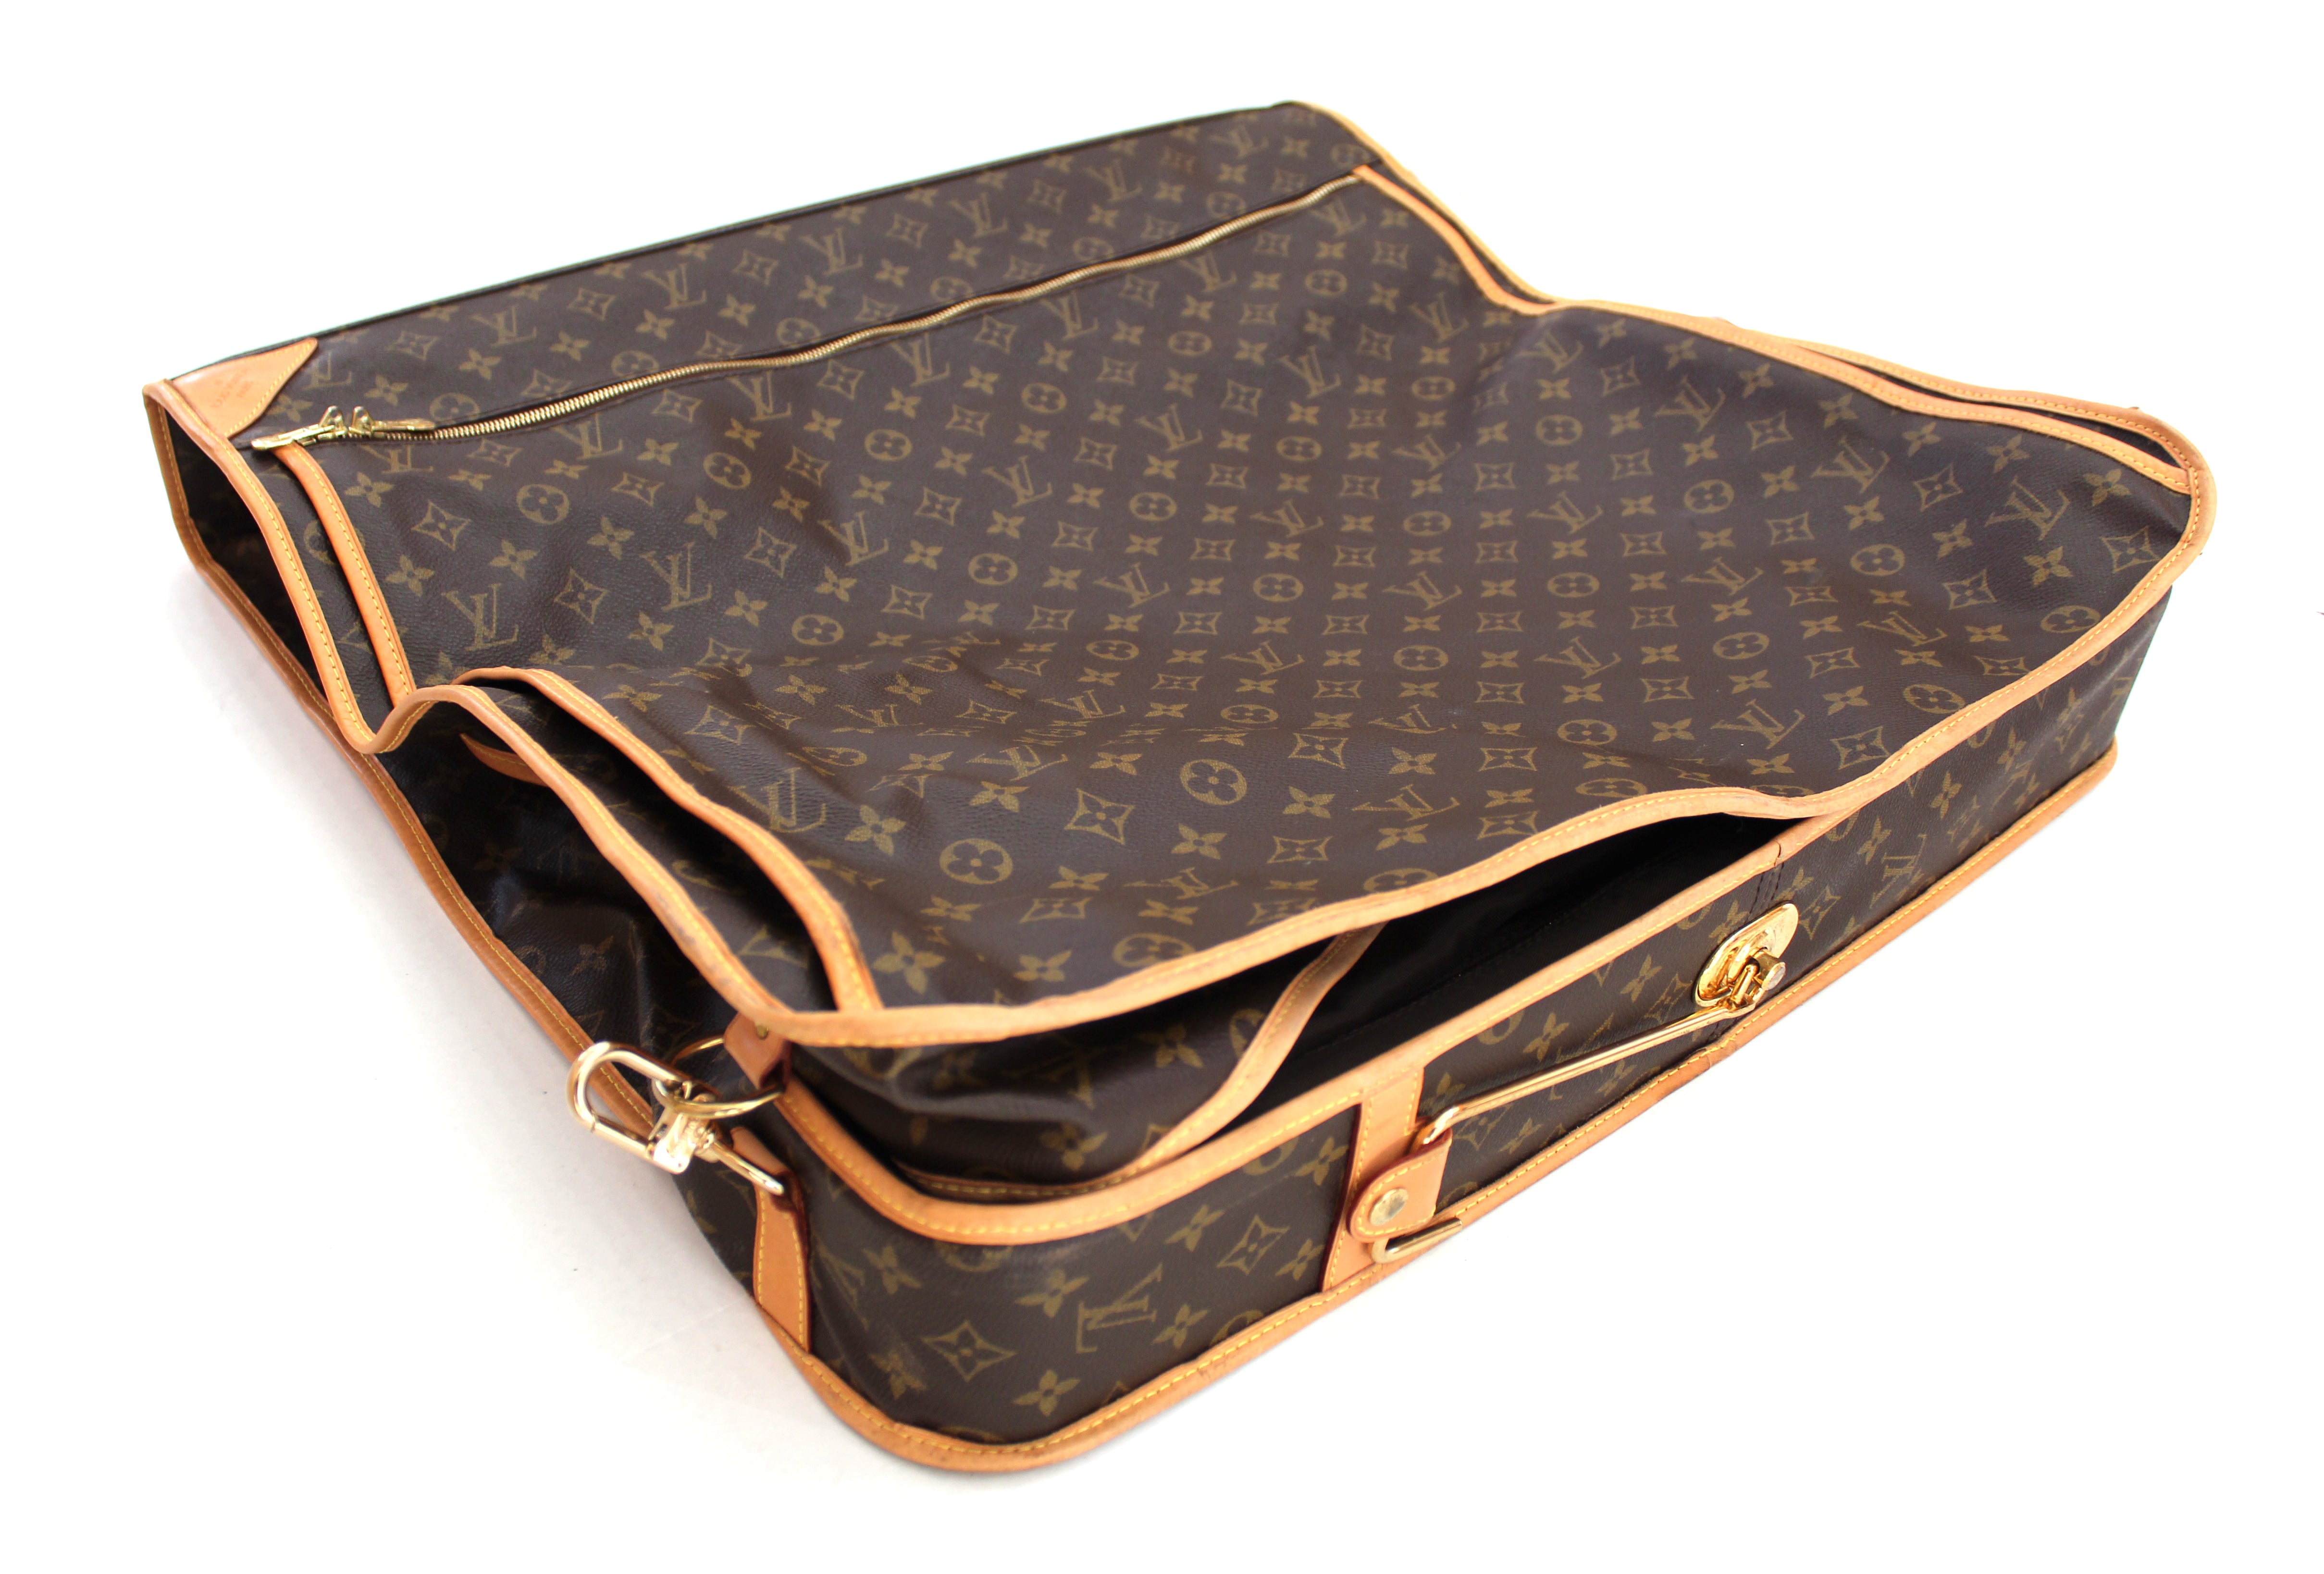 Authentic Louis Vuitton Garment Luggage Brown Monogram Canvas and Leather Weekend/Travel Bag